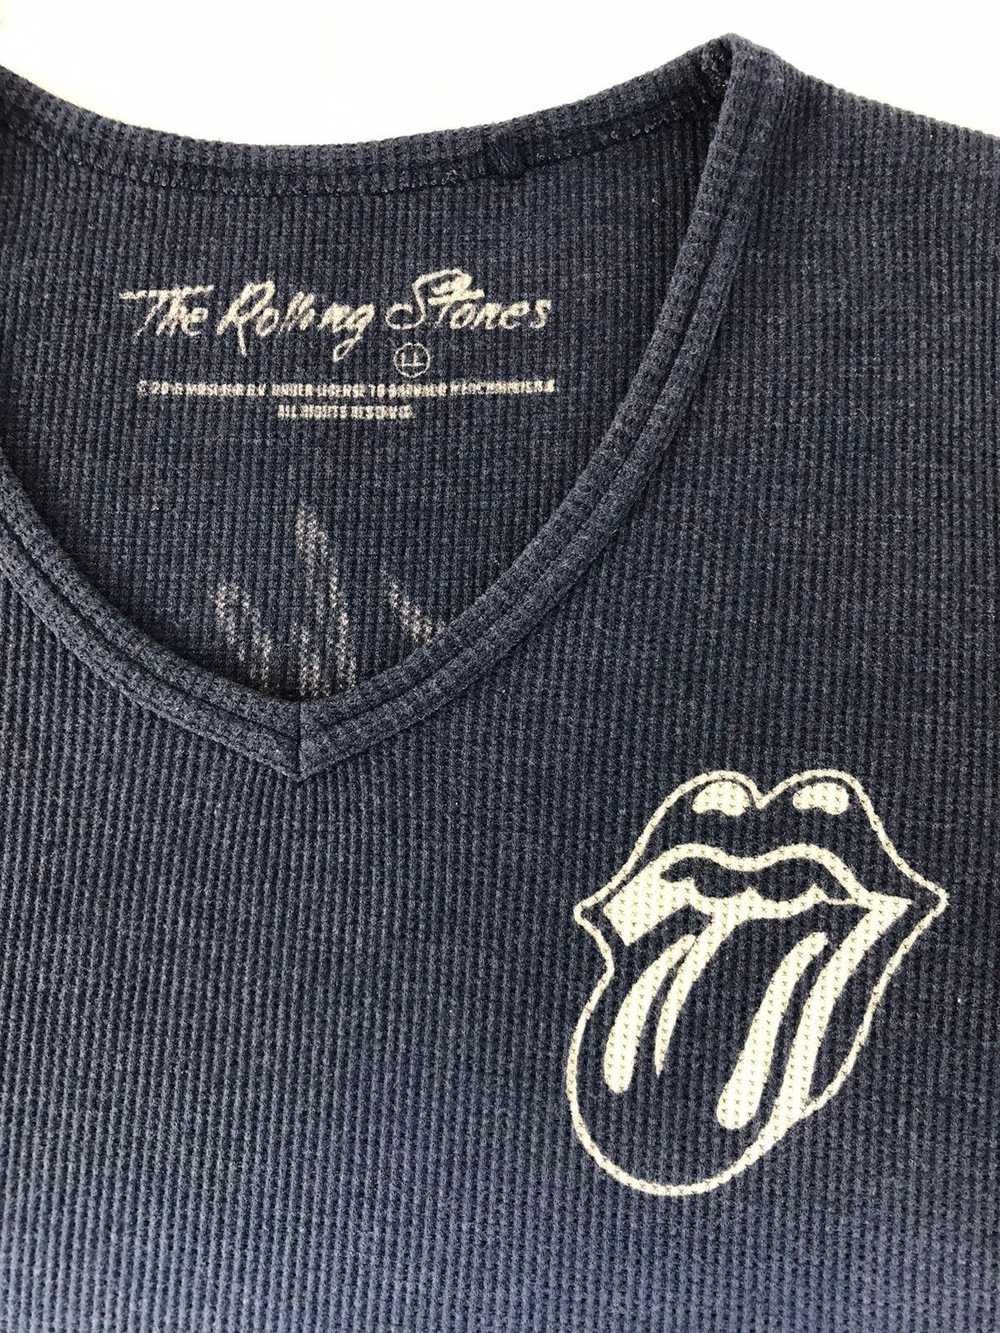 Band Tees × Rock Band × The Rolling Stones The Ro… - image 4